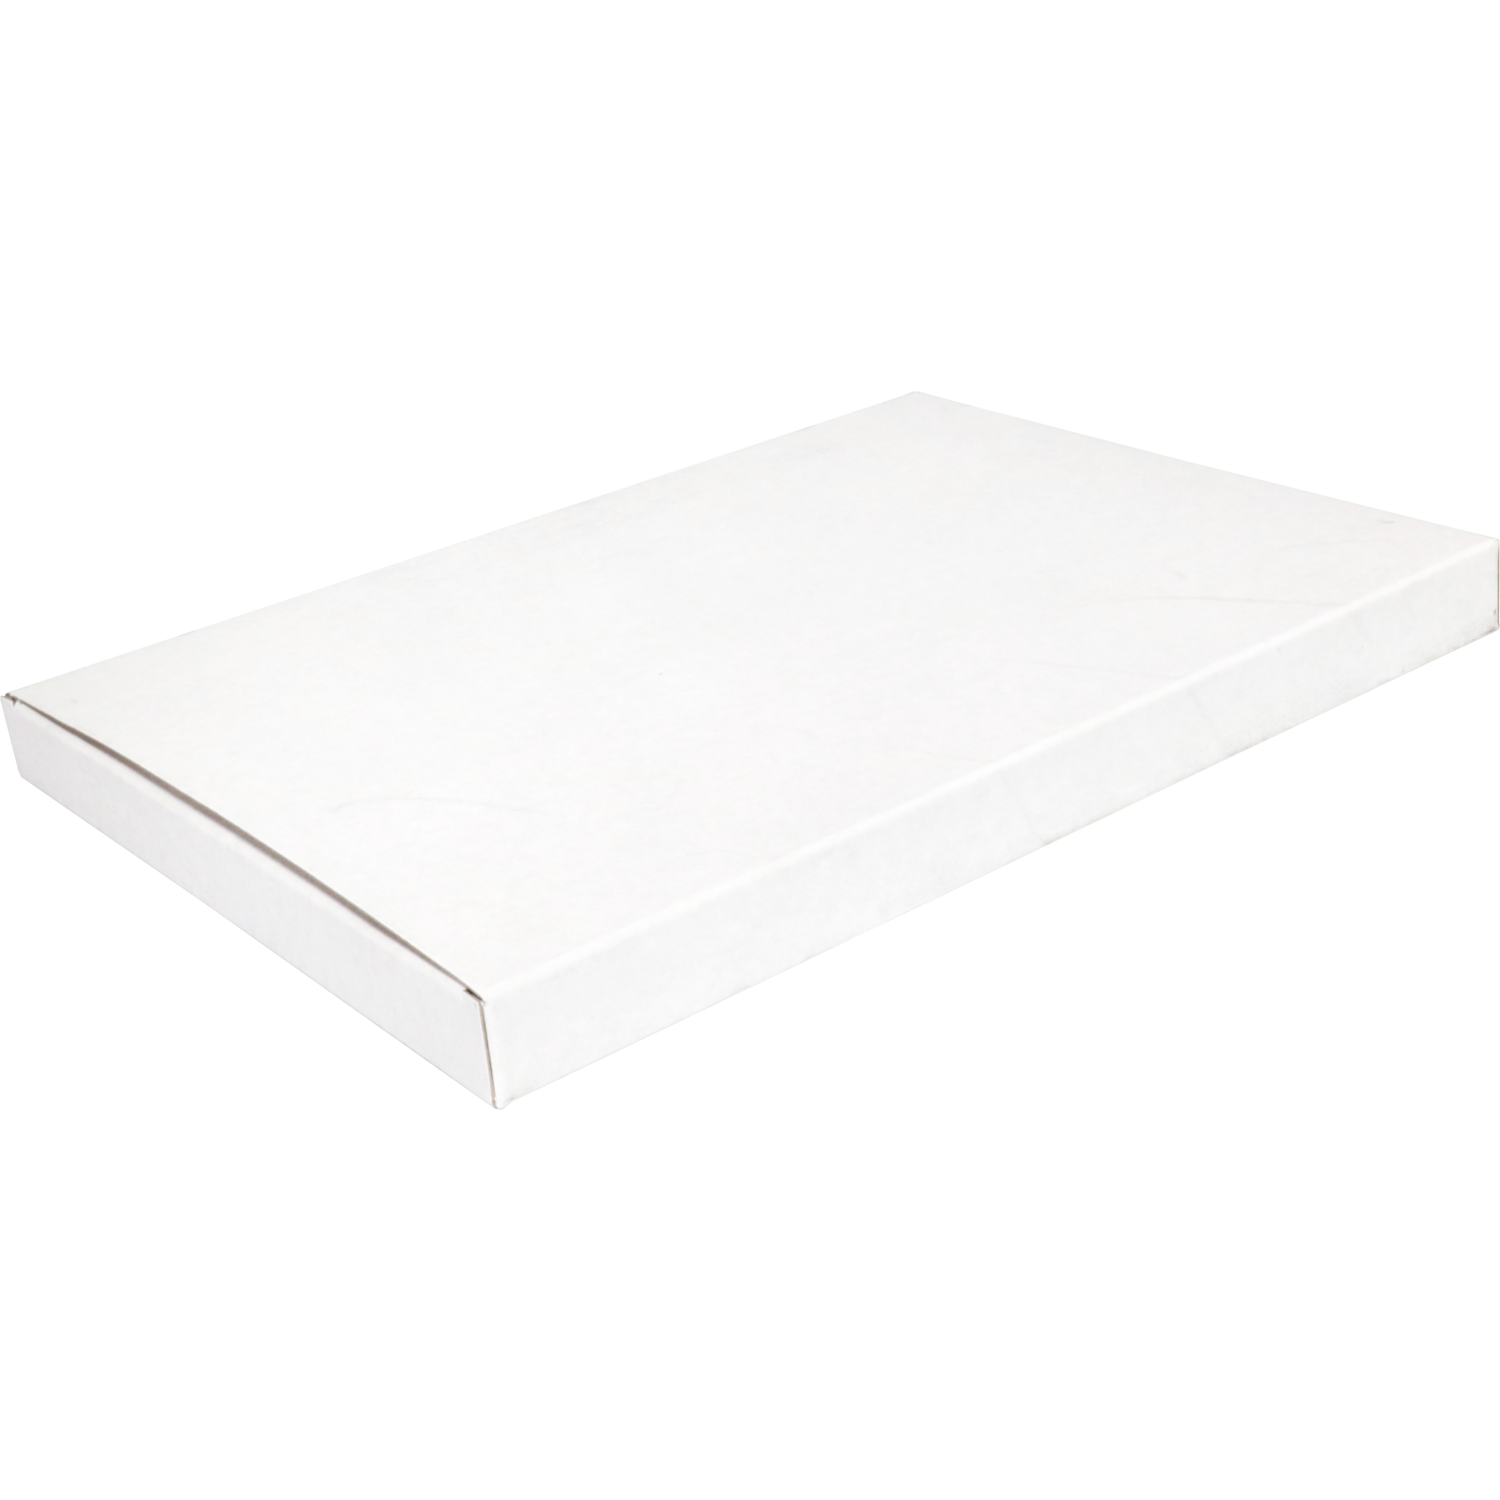 SendProof® Fits through letterbox - box, A4, cardboard, 250x350x28mm, white 1